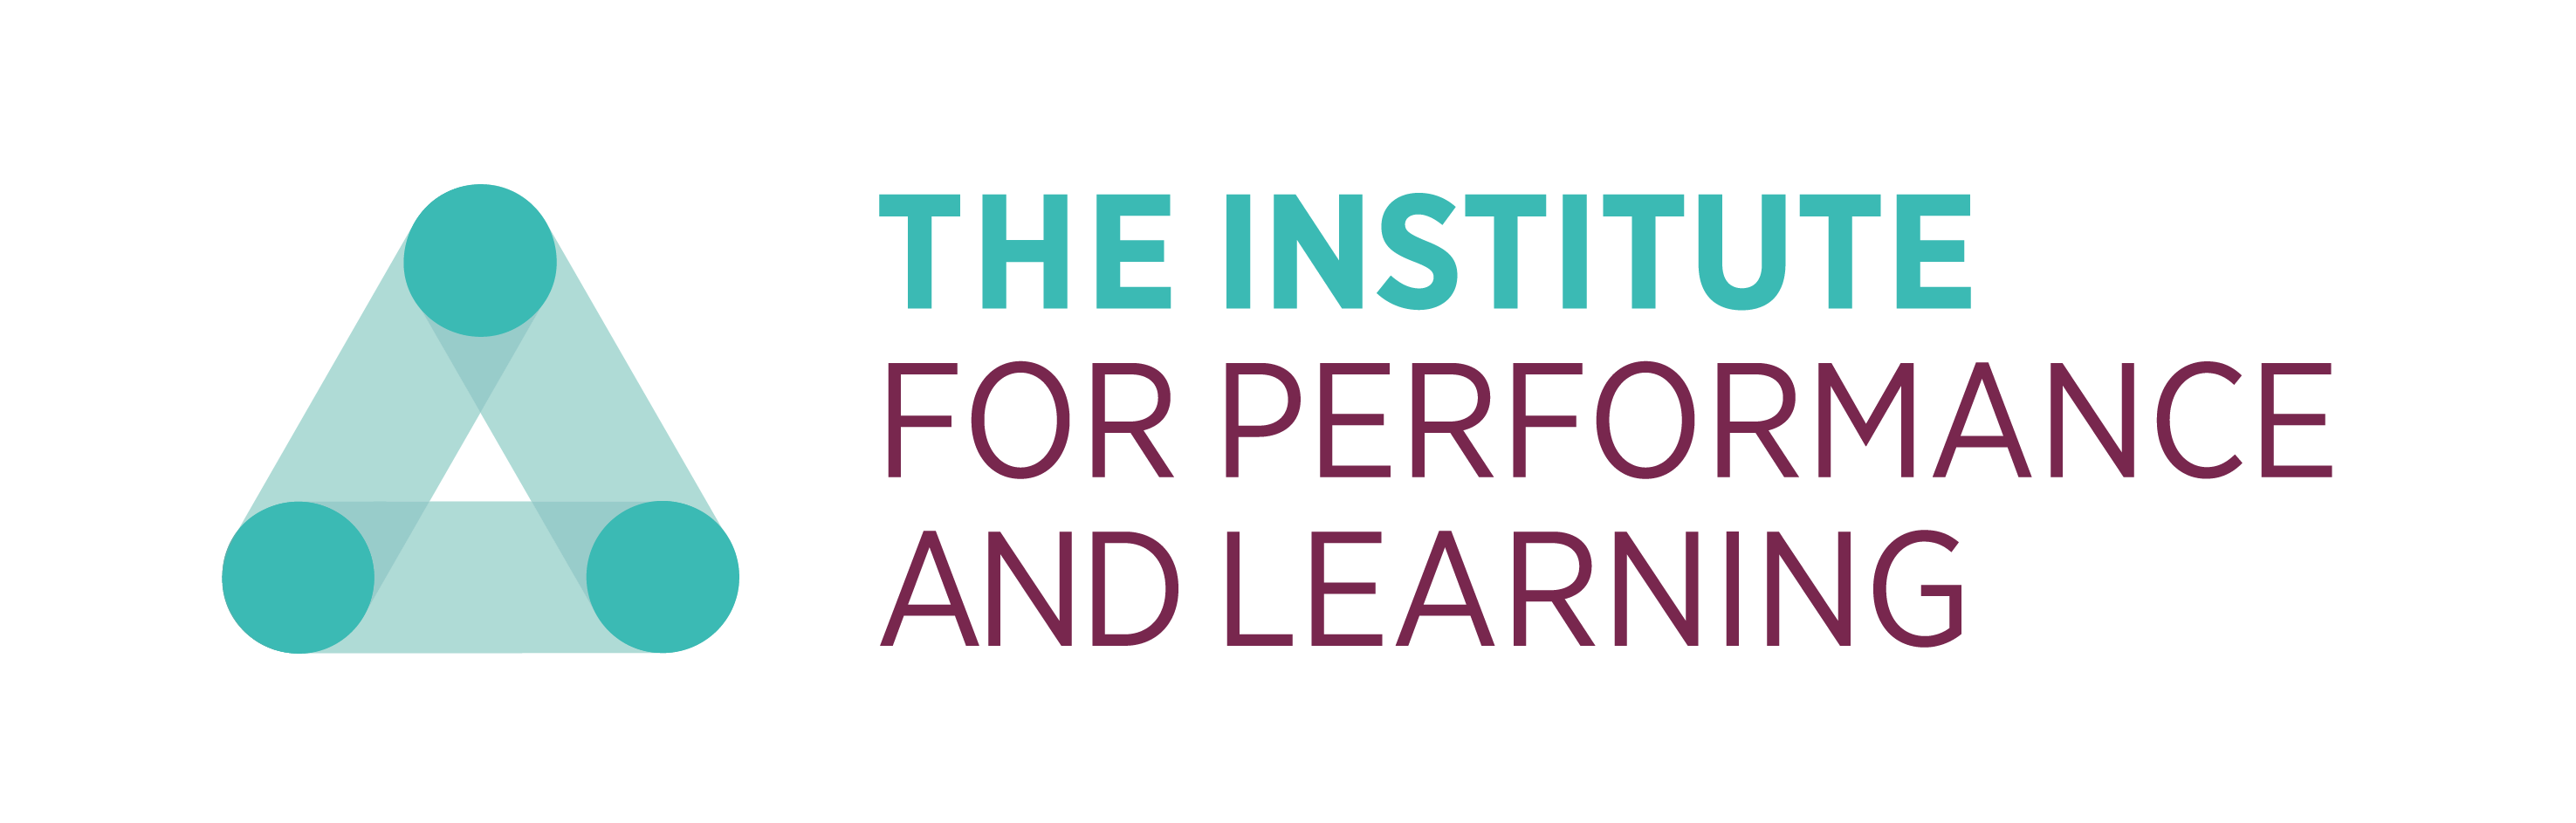 Member: The Institute for Performance and Learning